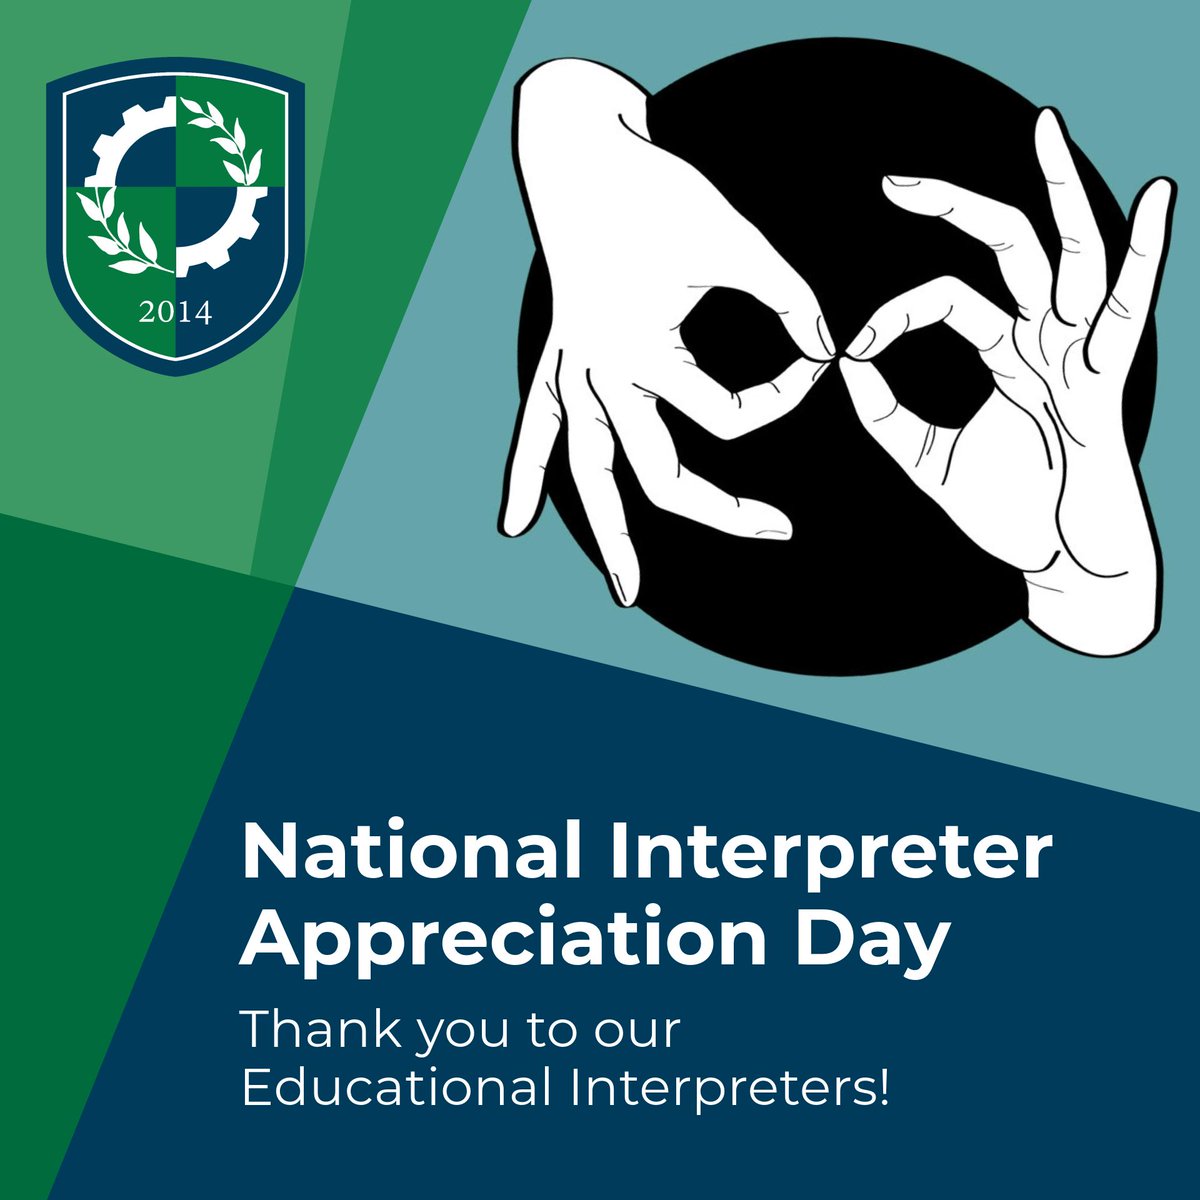 🎉 Happy National Interpreter Appreciation Day! 📚 Today, we extend our deepest gratitude to our educational interpreters! Thank you for your unwavering commitment and for making our learning community inclusive and accessible to all. #InterpreterAppreciationDay #ENSATS